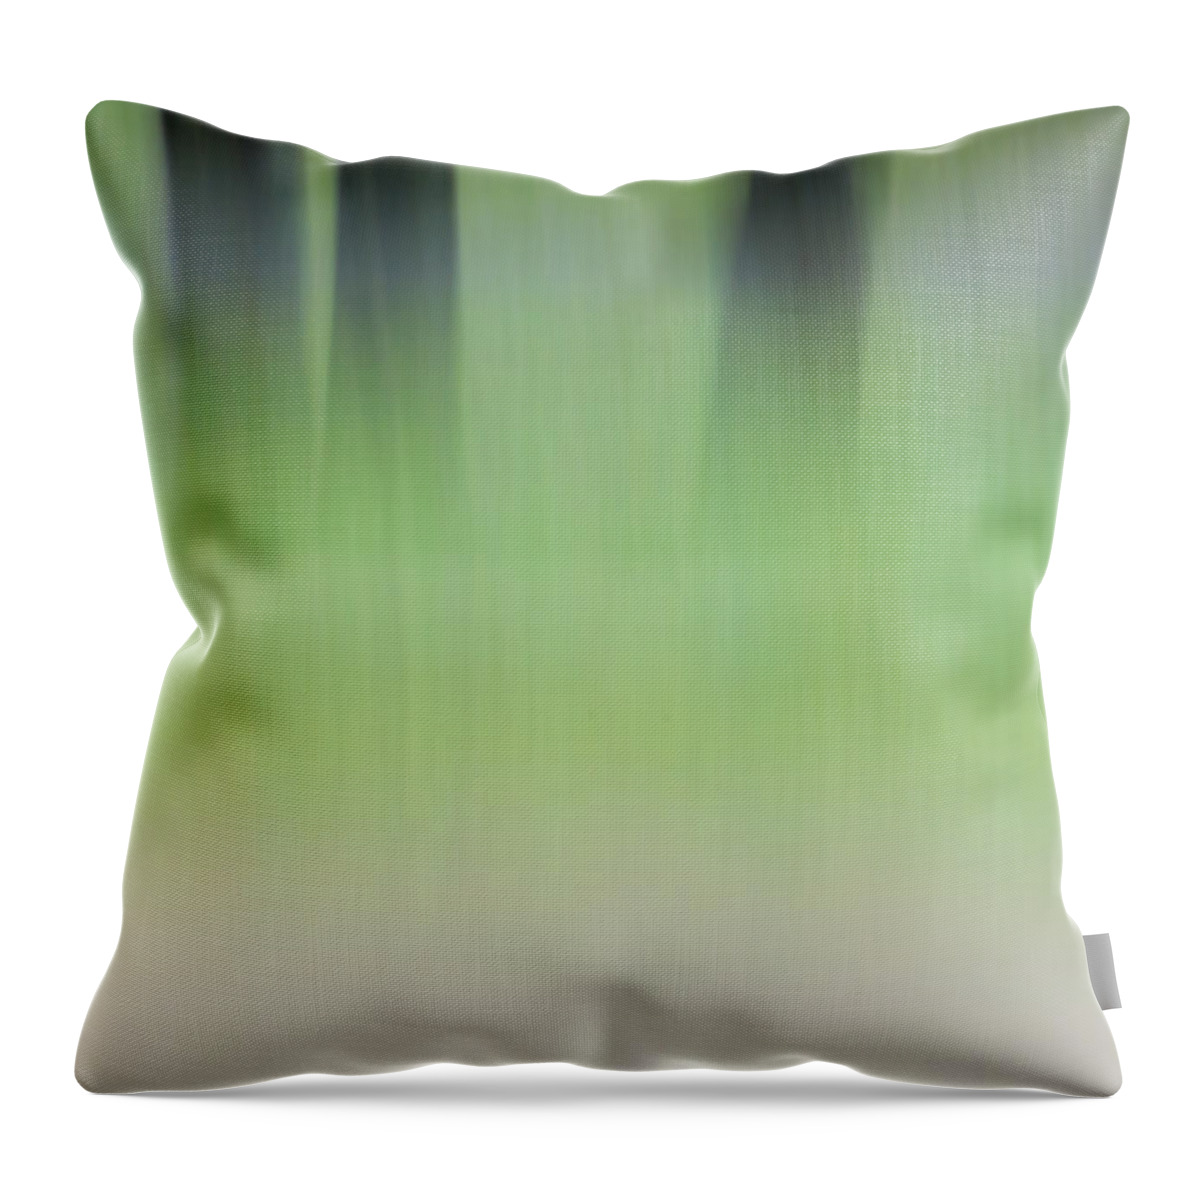 Woods Throw Pillow featuring the photograph Mint Slice by Jeff Mize